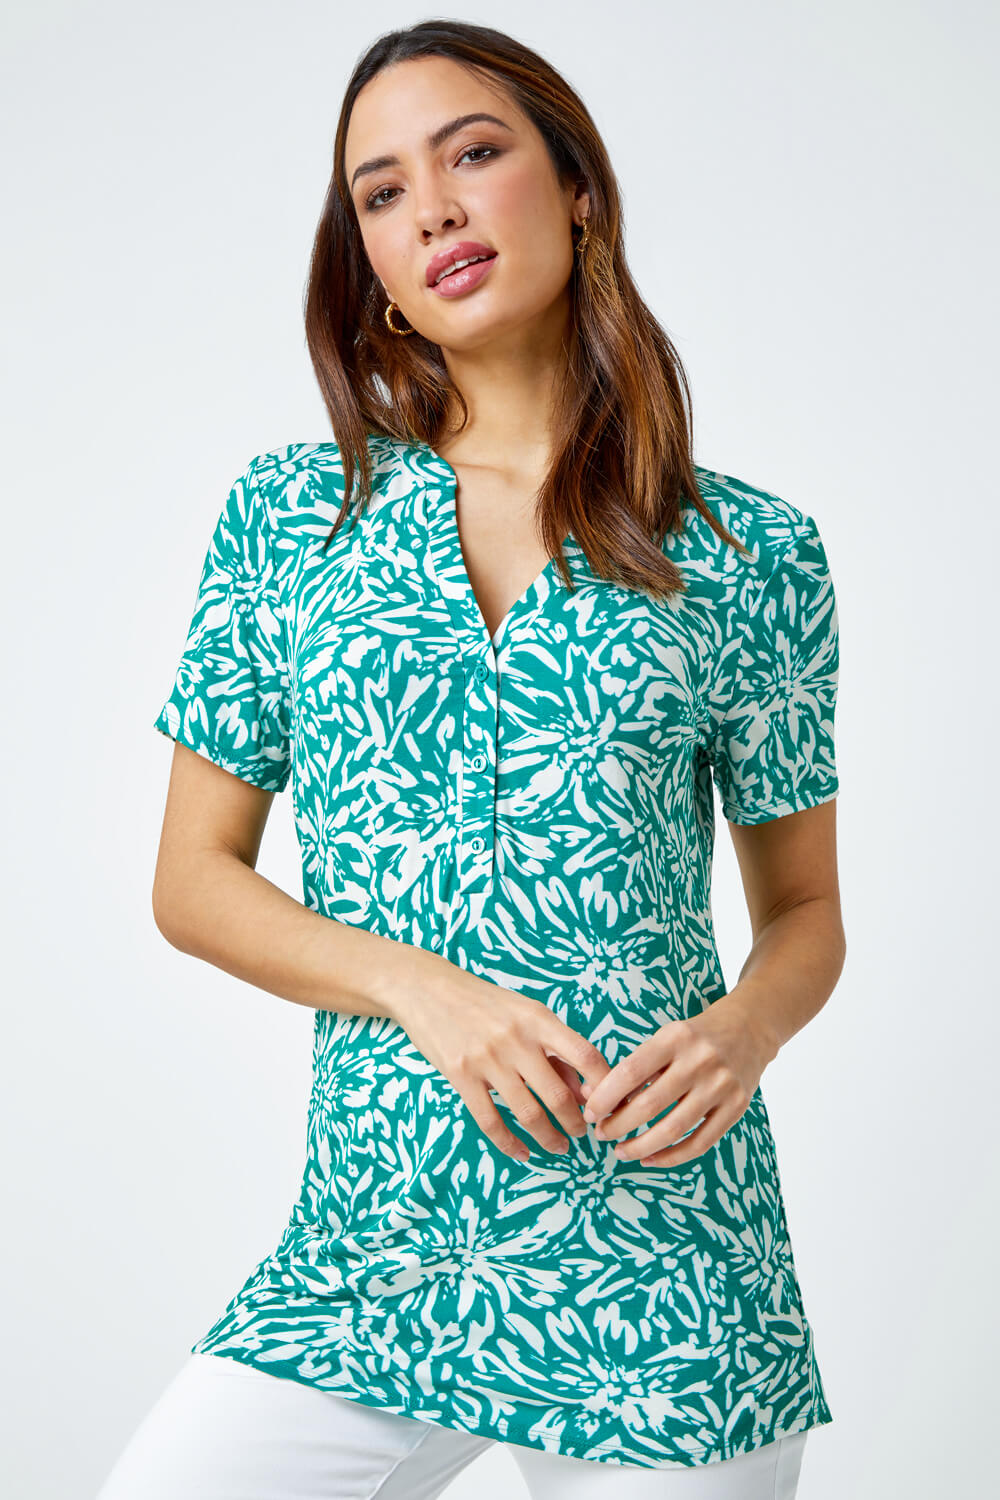 Green Abstract Floral Print Top, Image 2 of 5